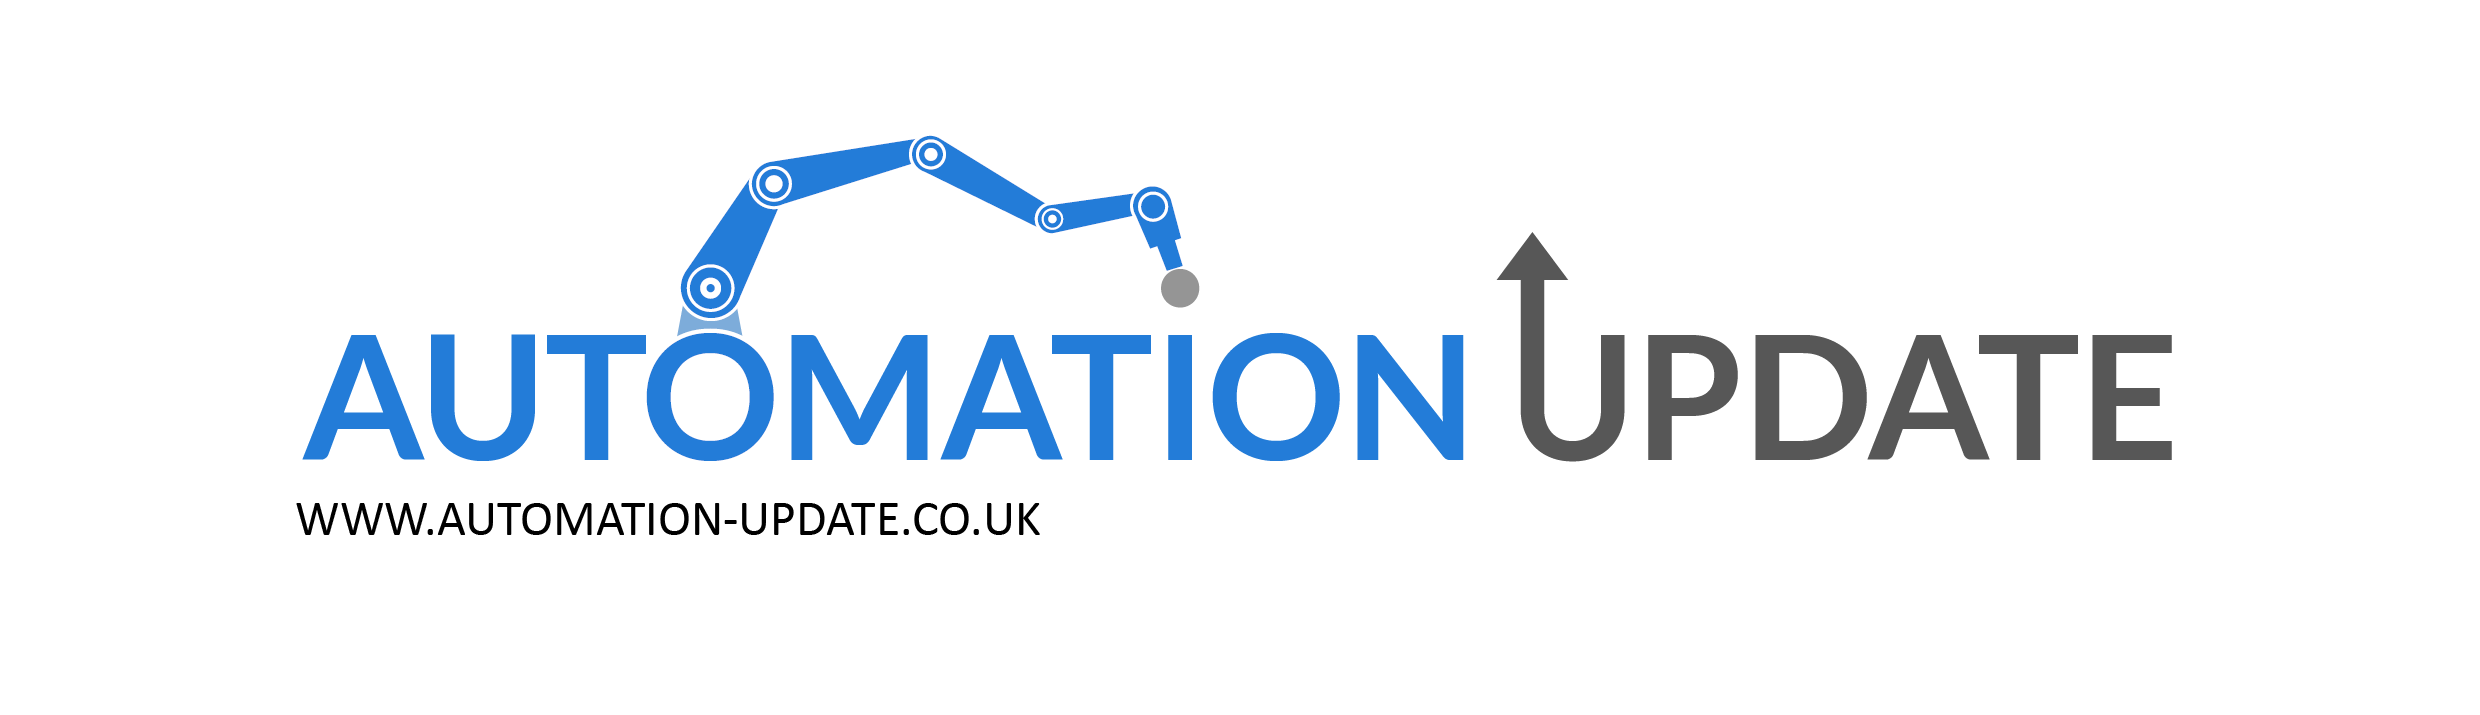 Automation Update